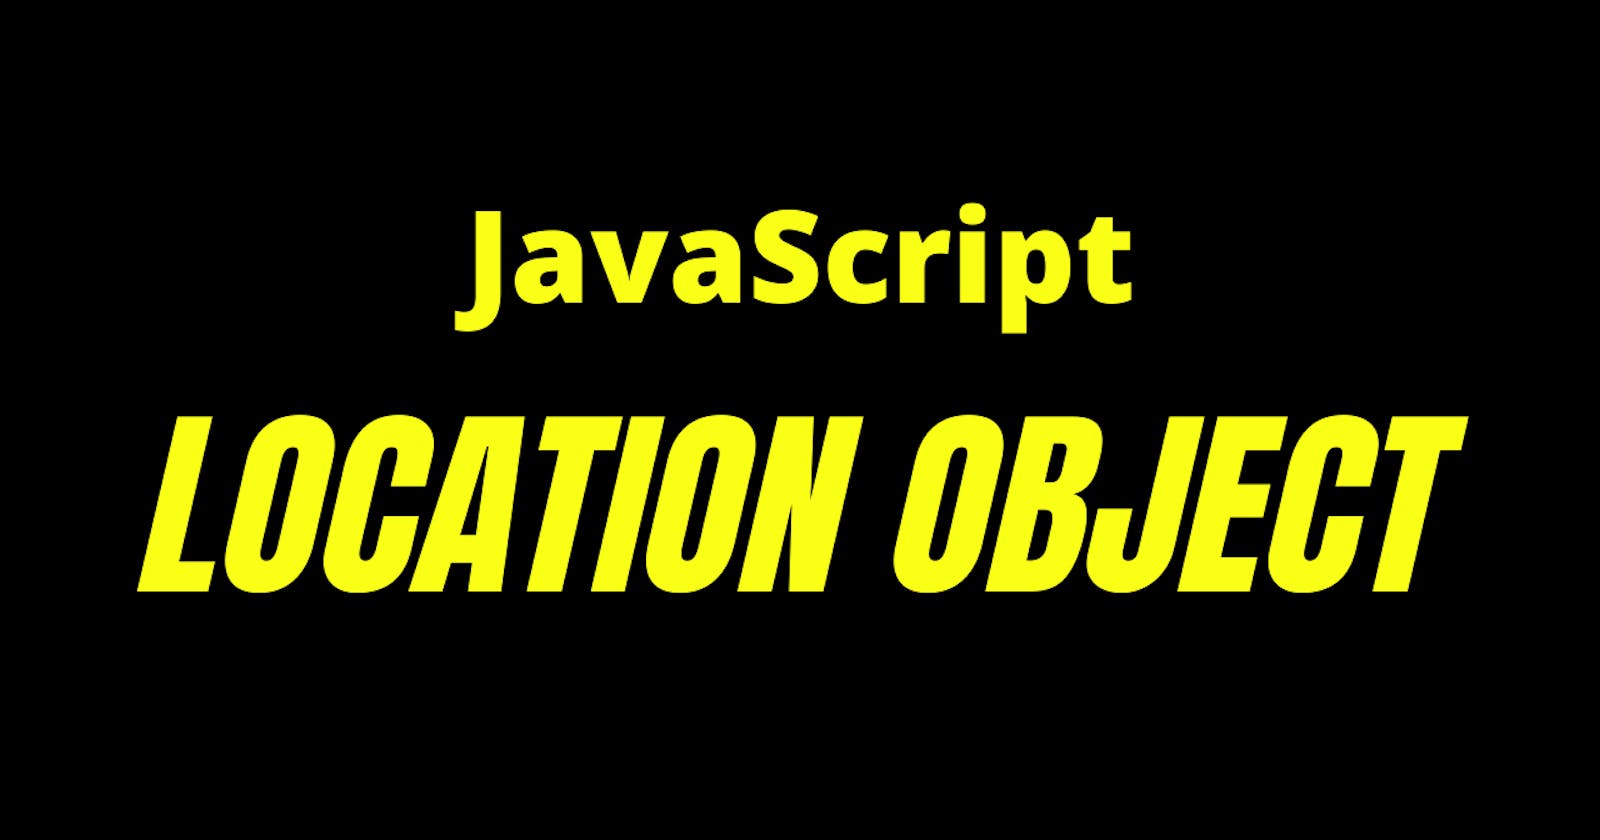 All You Need To Know About JavaScript Location Object